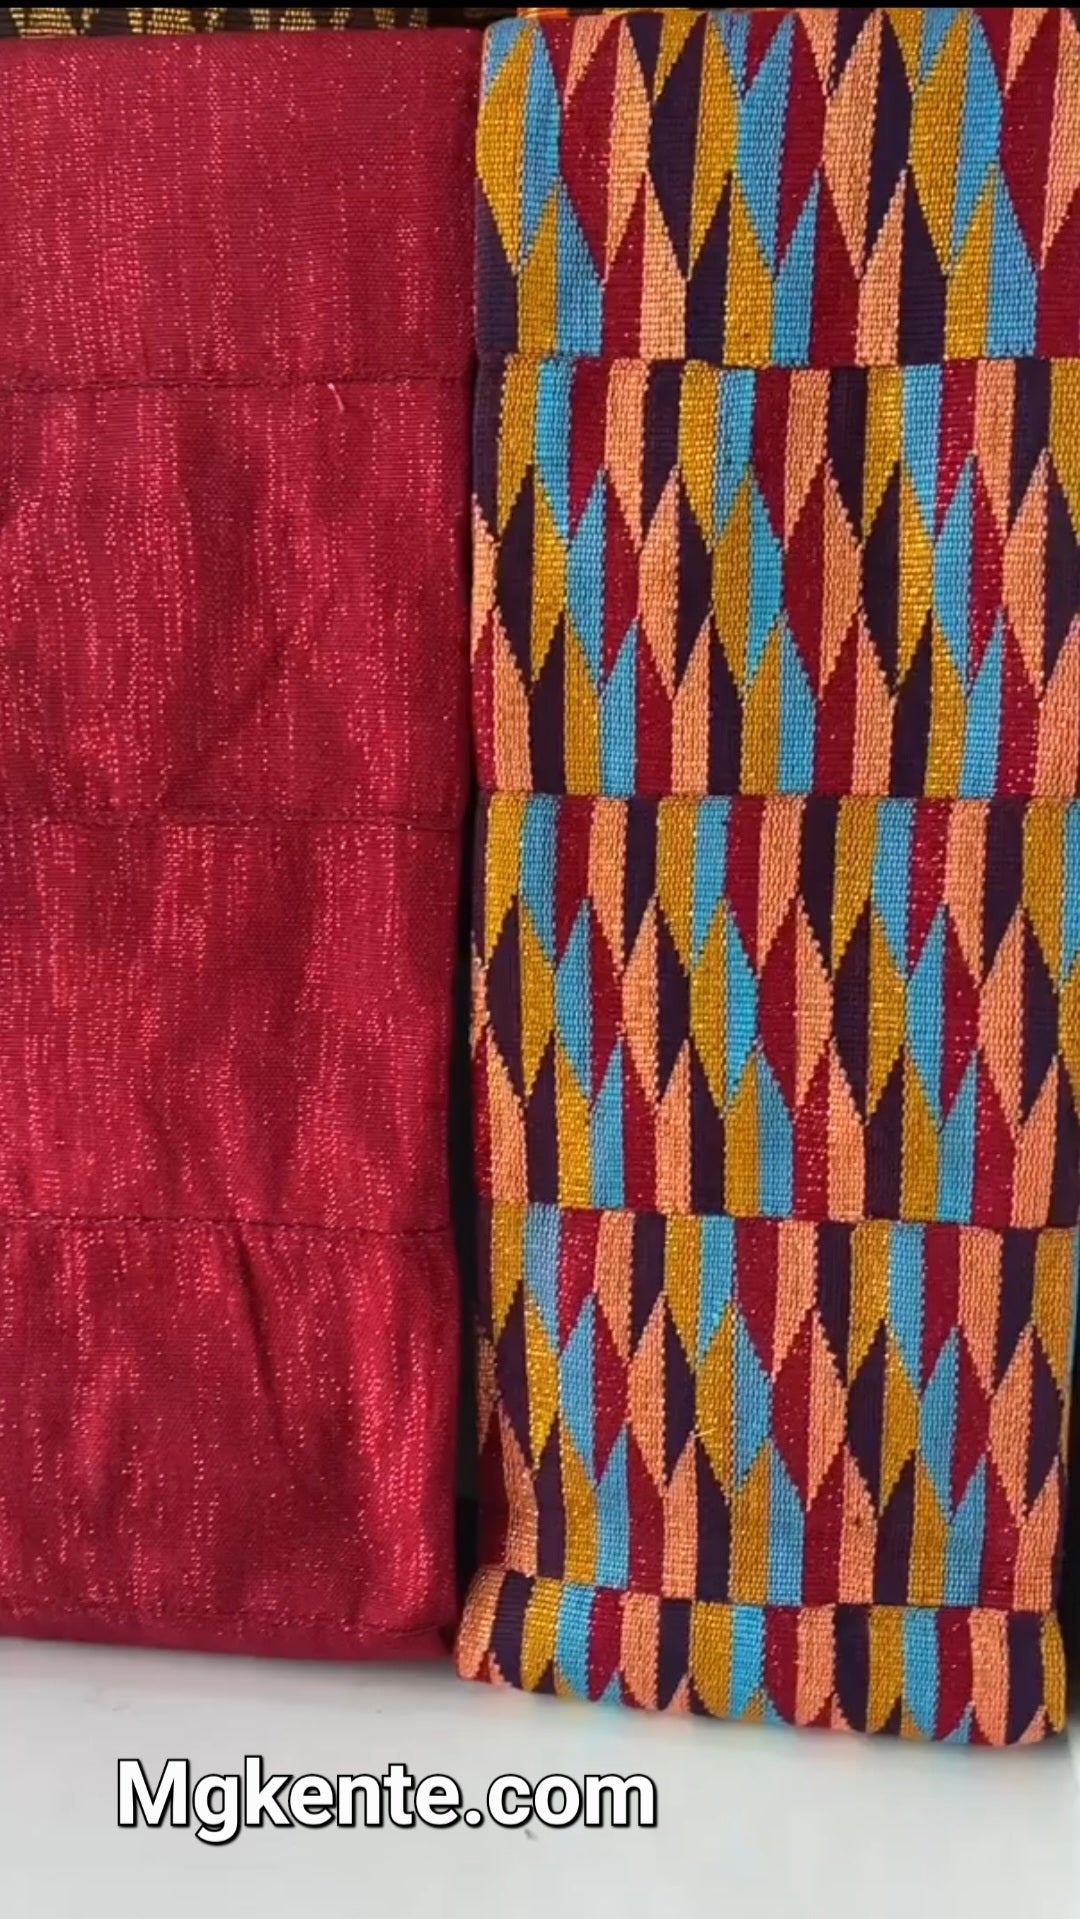 Authentic Hand Weaved Kente Cloth A2552